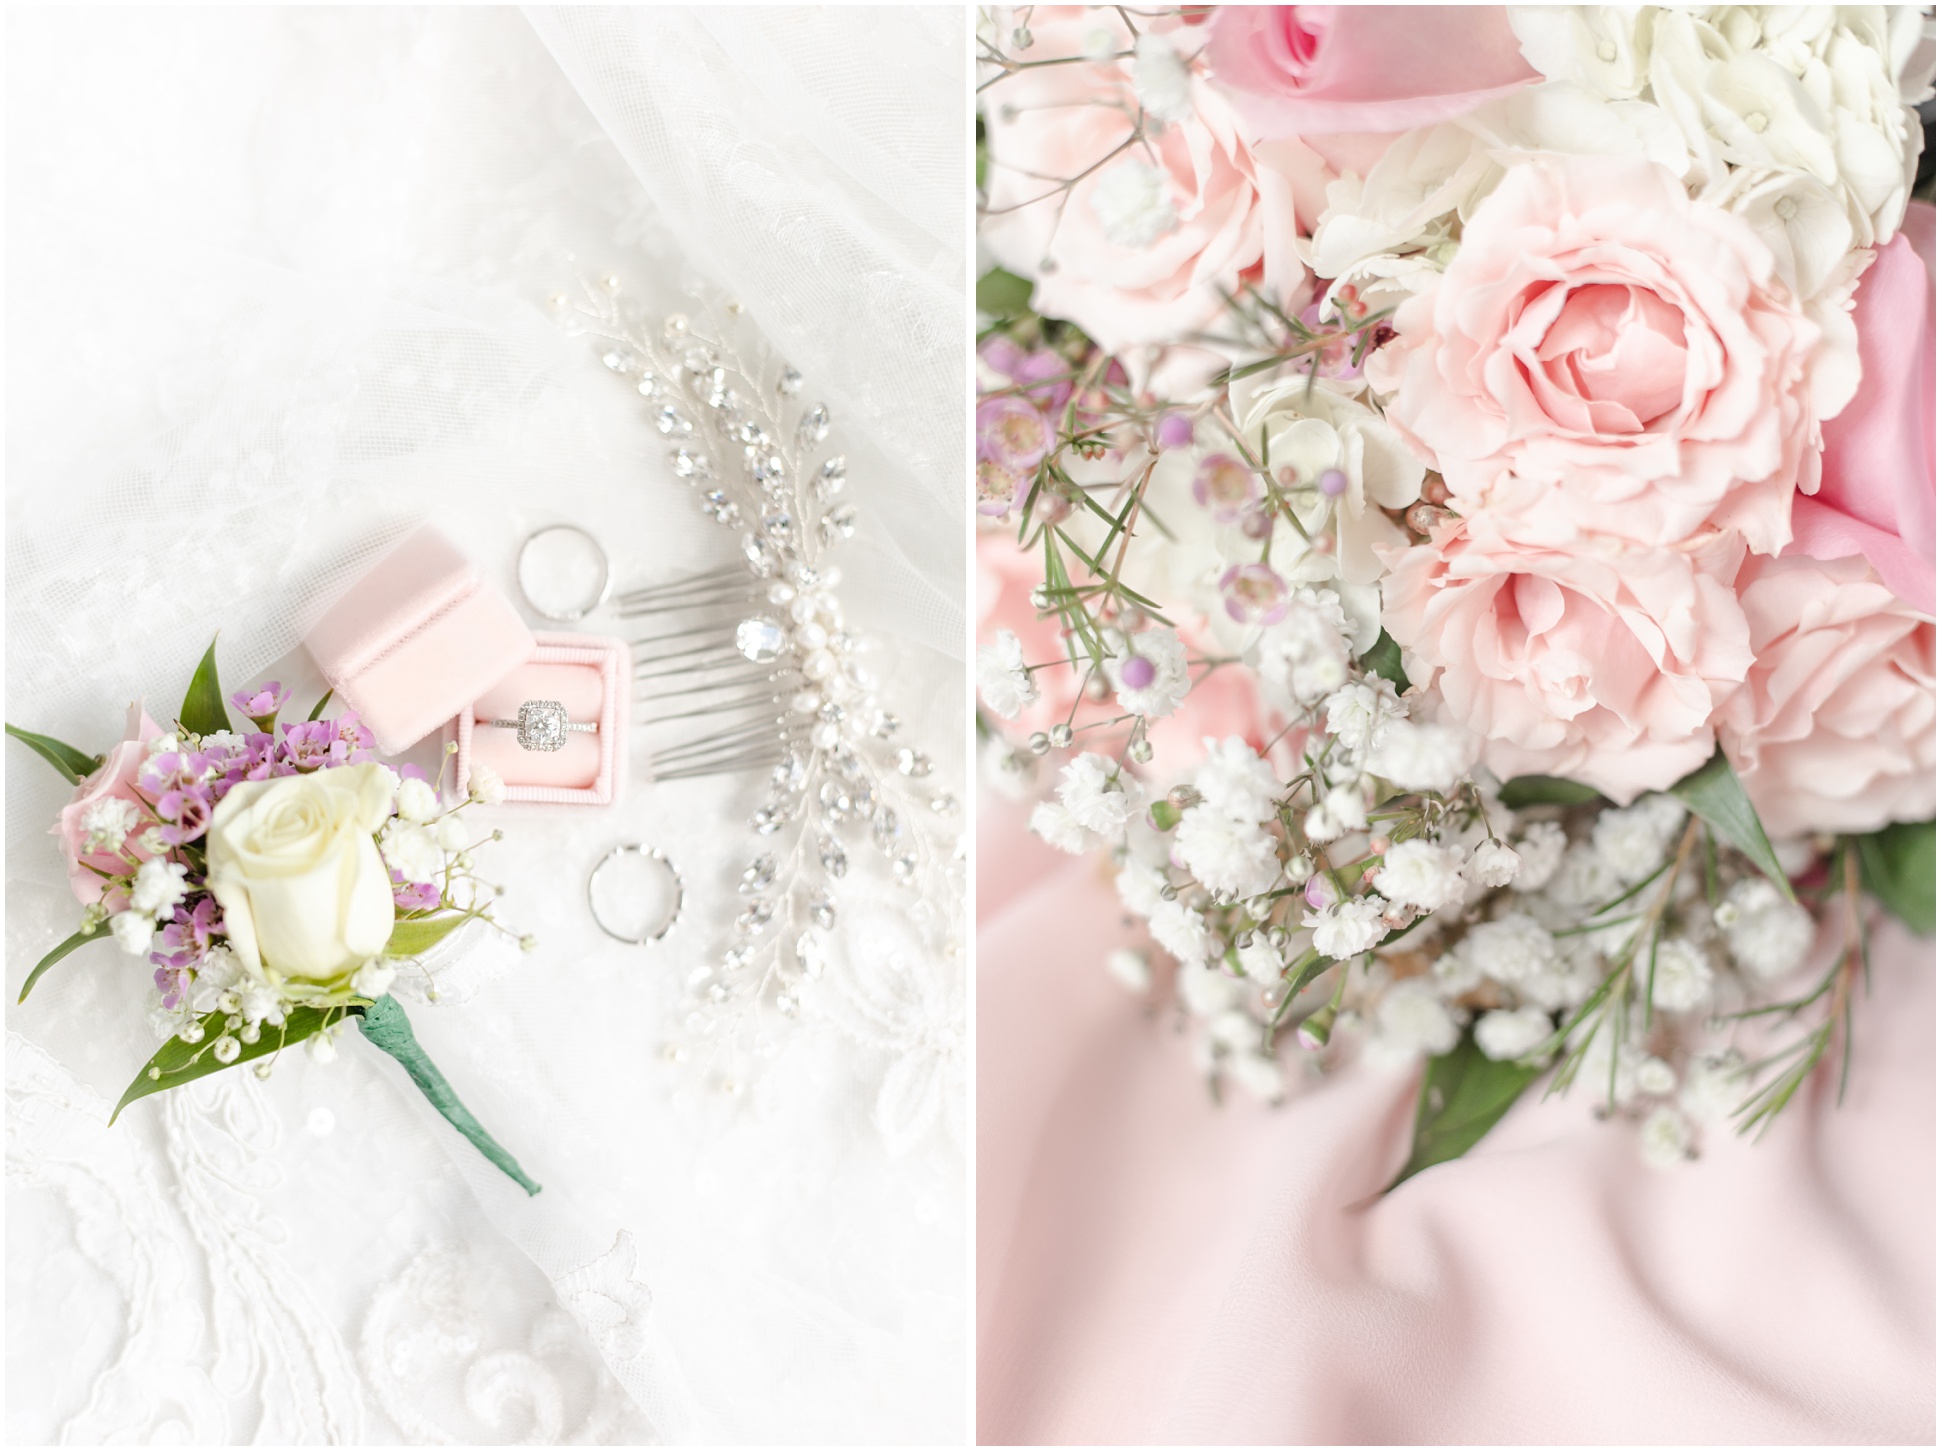 All the tiny little jewelry and floral details from the wedding day